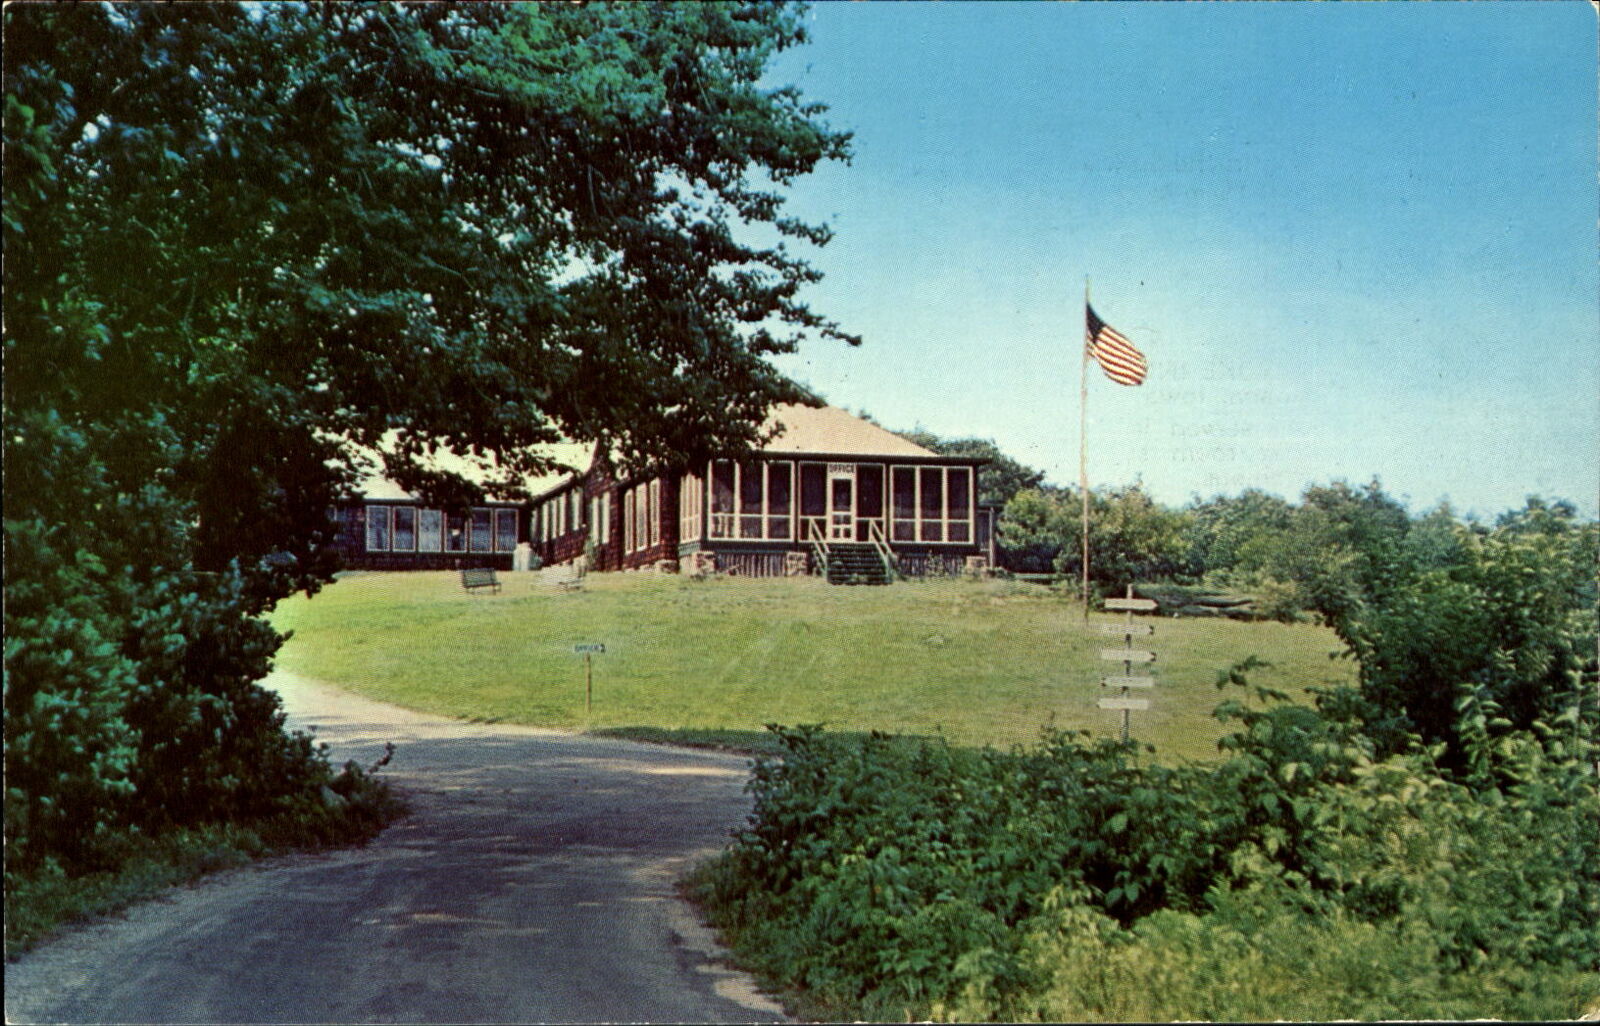 Vacation Lodge for Older Adults ~ Ivoryton Connecticut 1970s